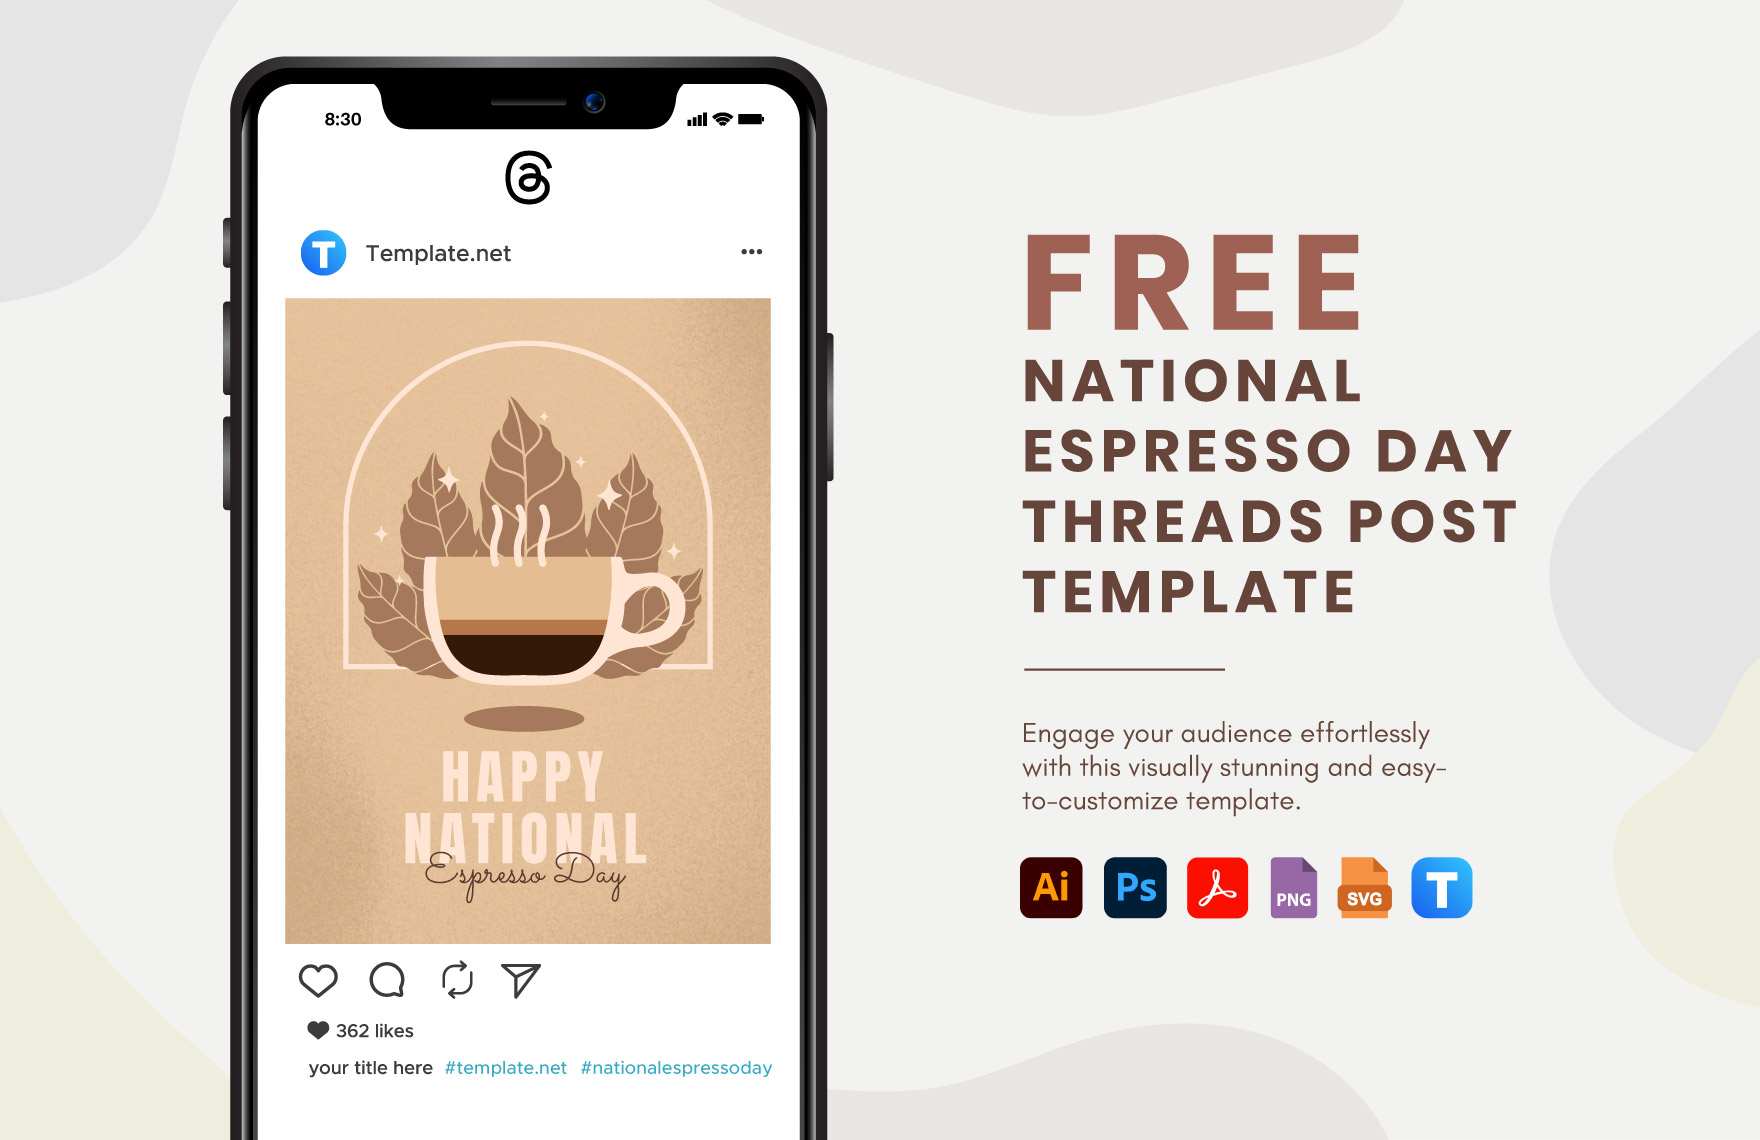 National Espresso Day Threads Post Template